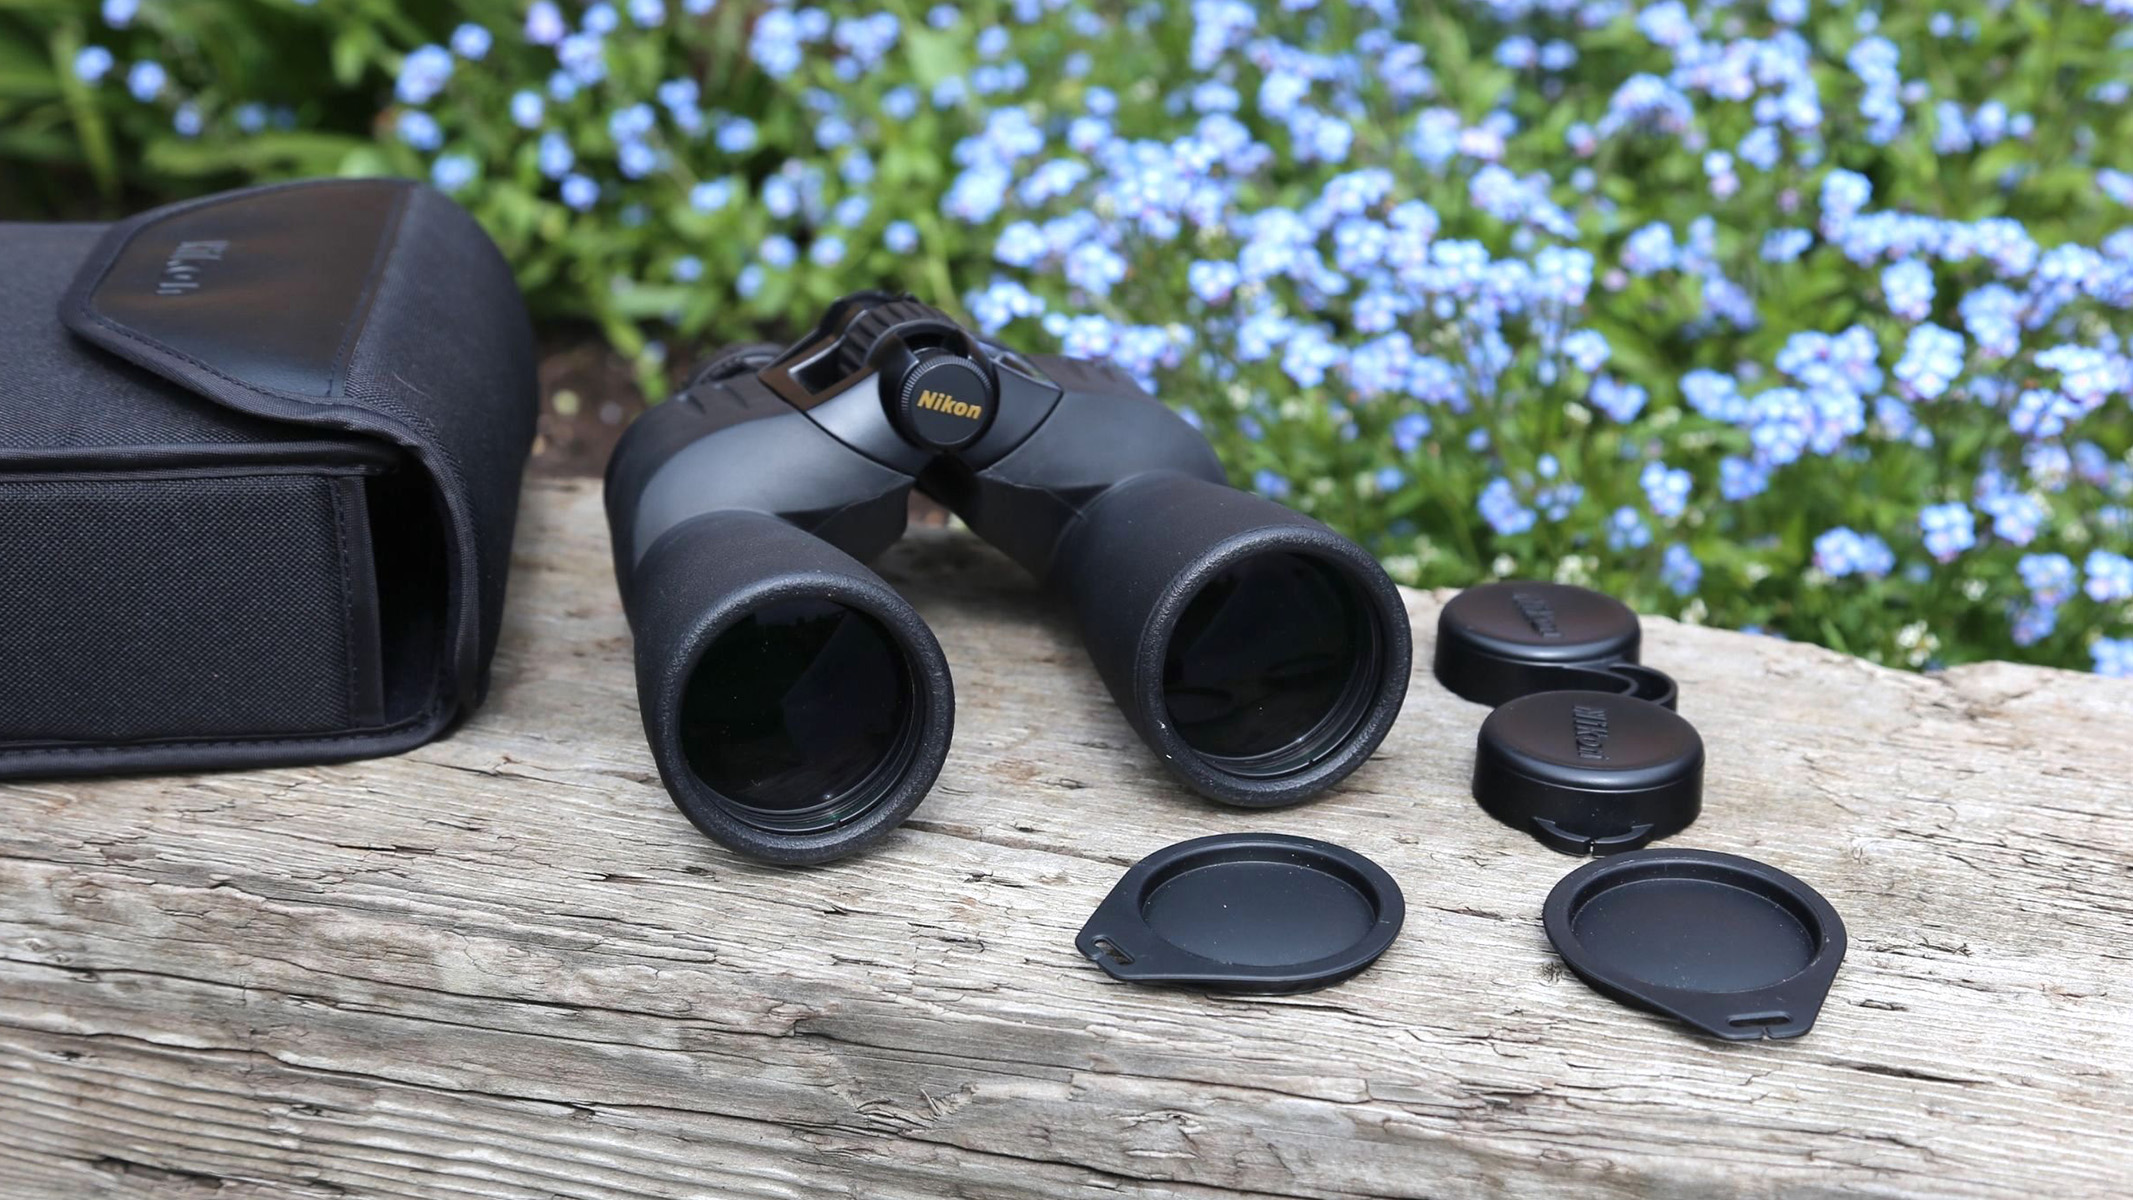 Image shows everything that is included with the Nikon Action EX 12x 50 binoculars